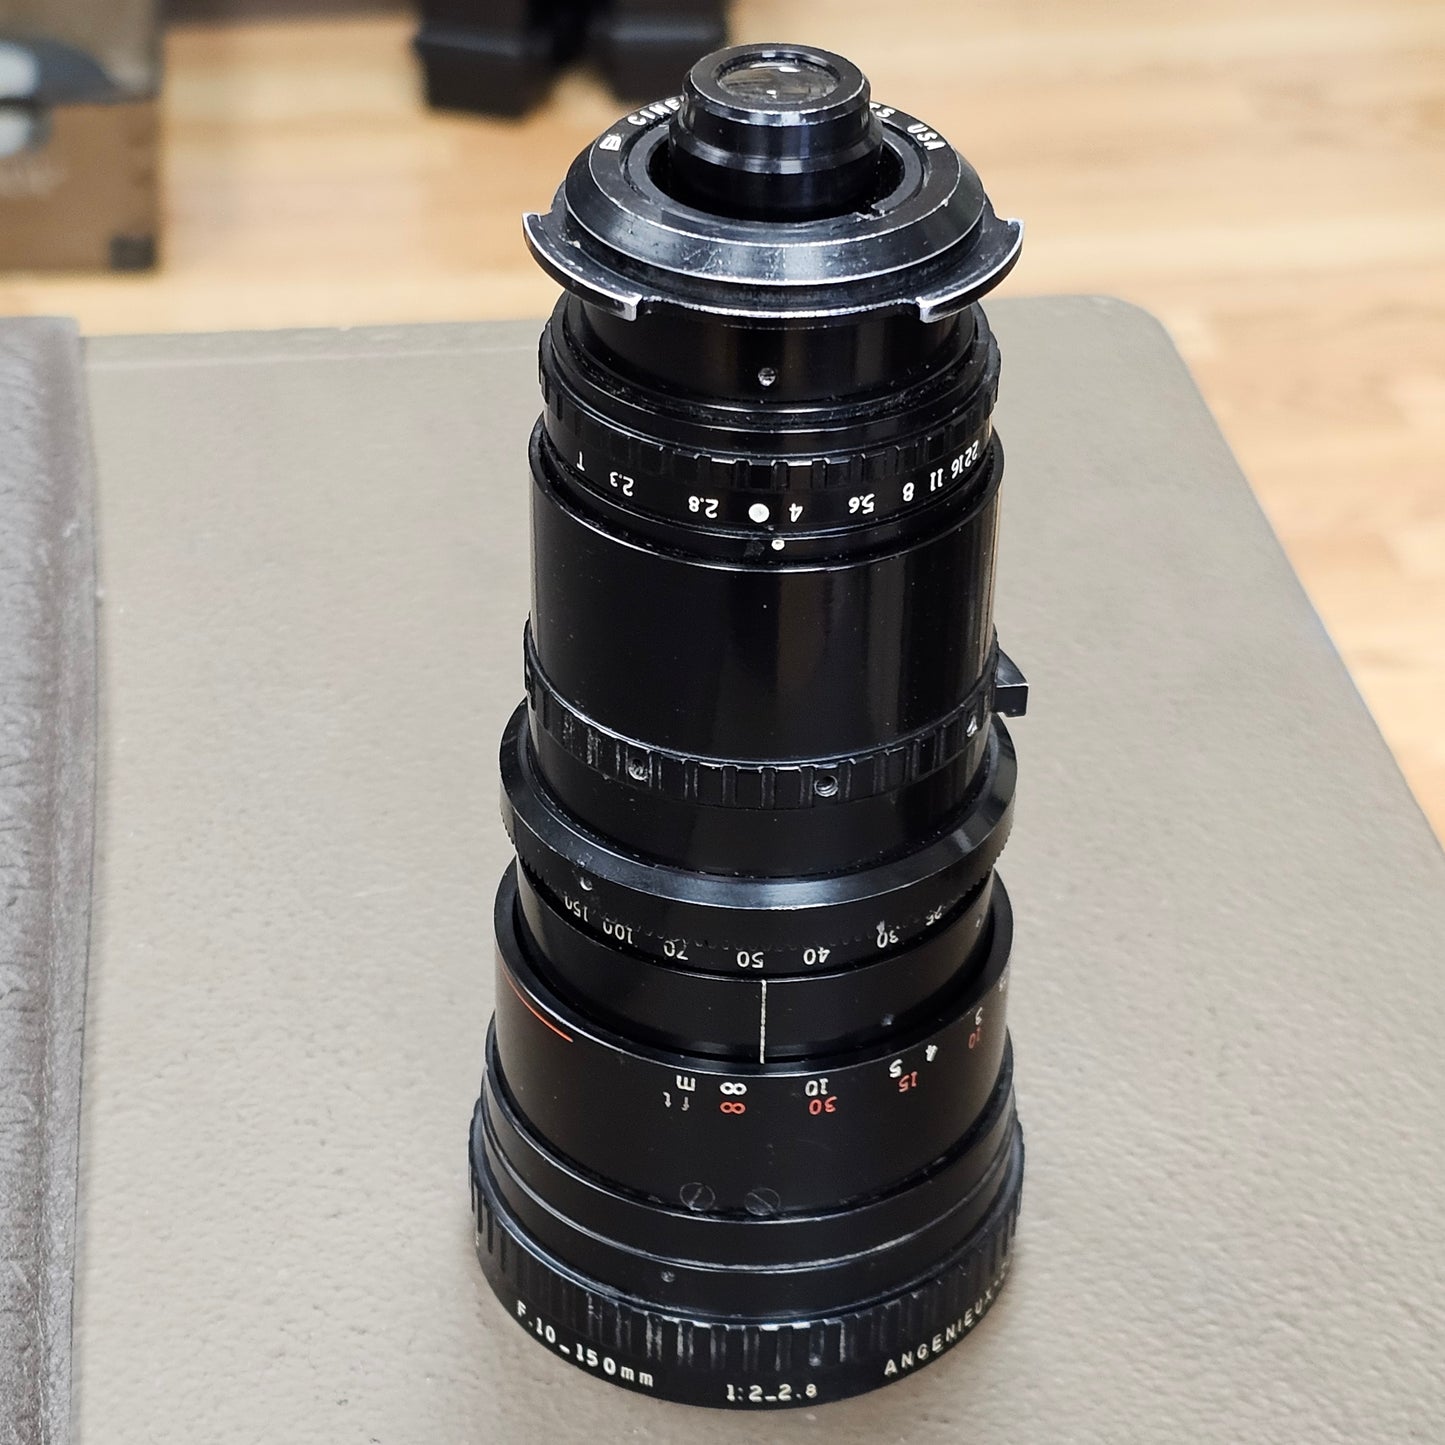 Angenieux 10-150mm T2.3 Type 15 x 10B Zoom Lens in CP-16 Mount S# 1425296